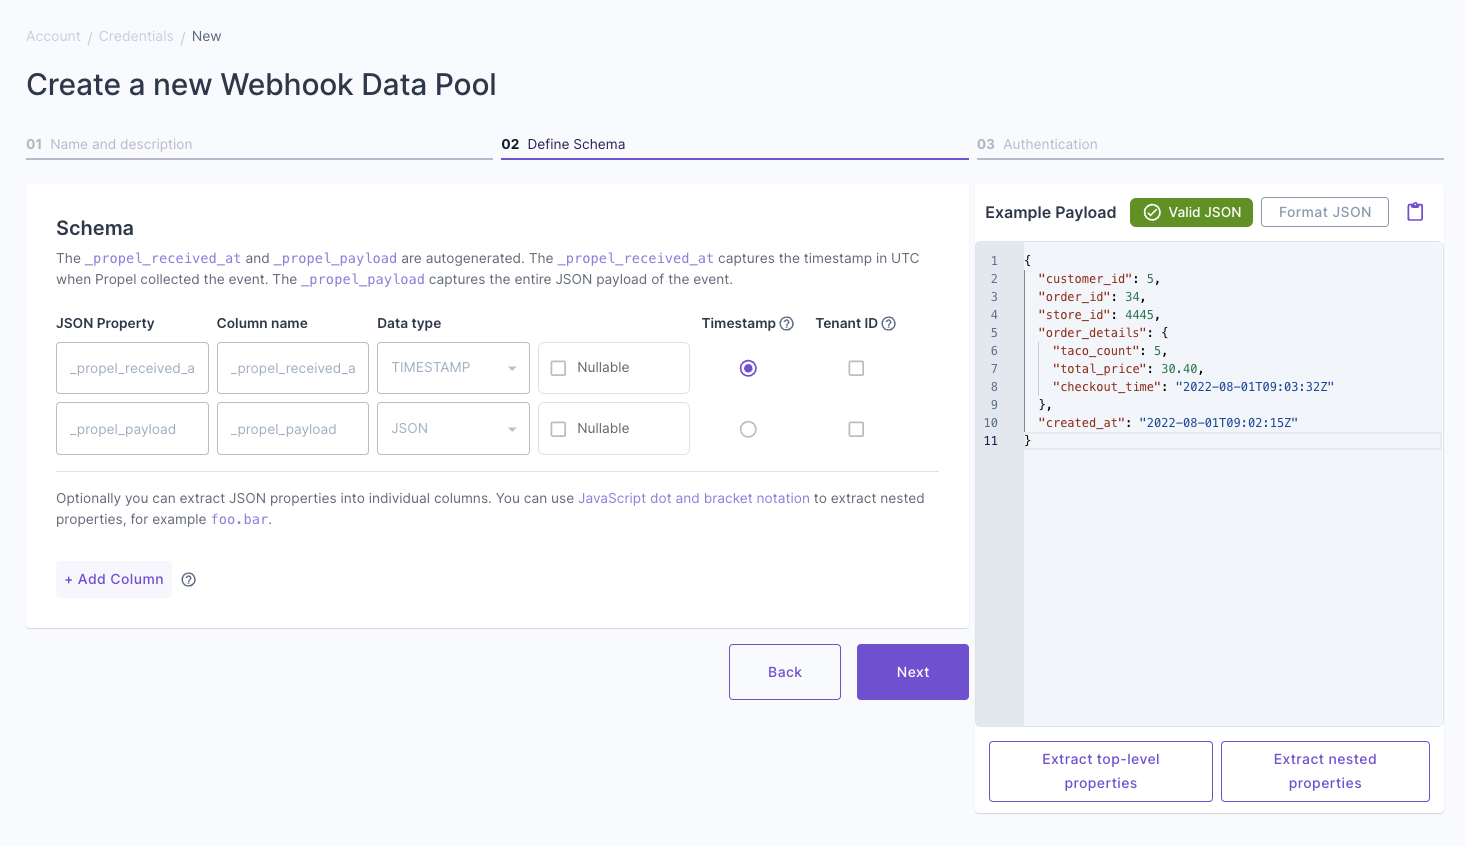 A screenshot demonstrating the initial schema for a new Webhook Data Pool in the Propel Console.